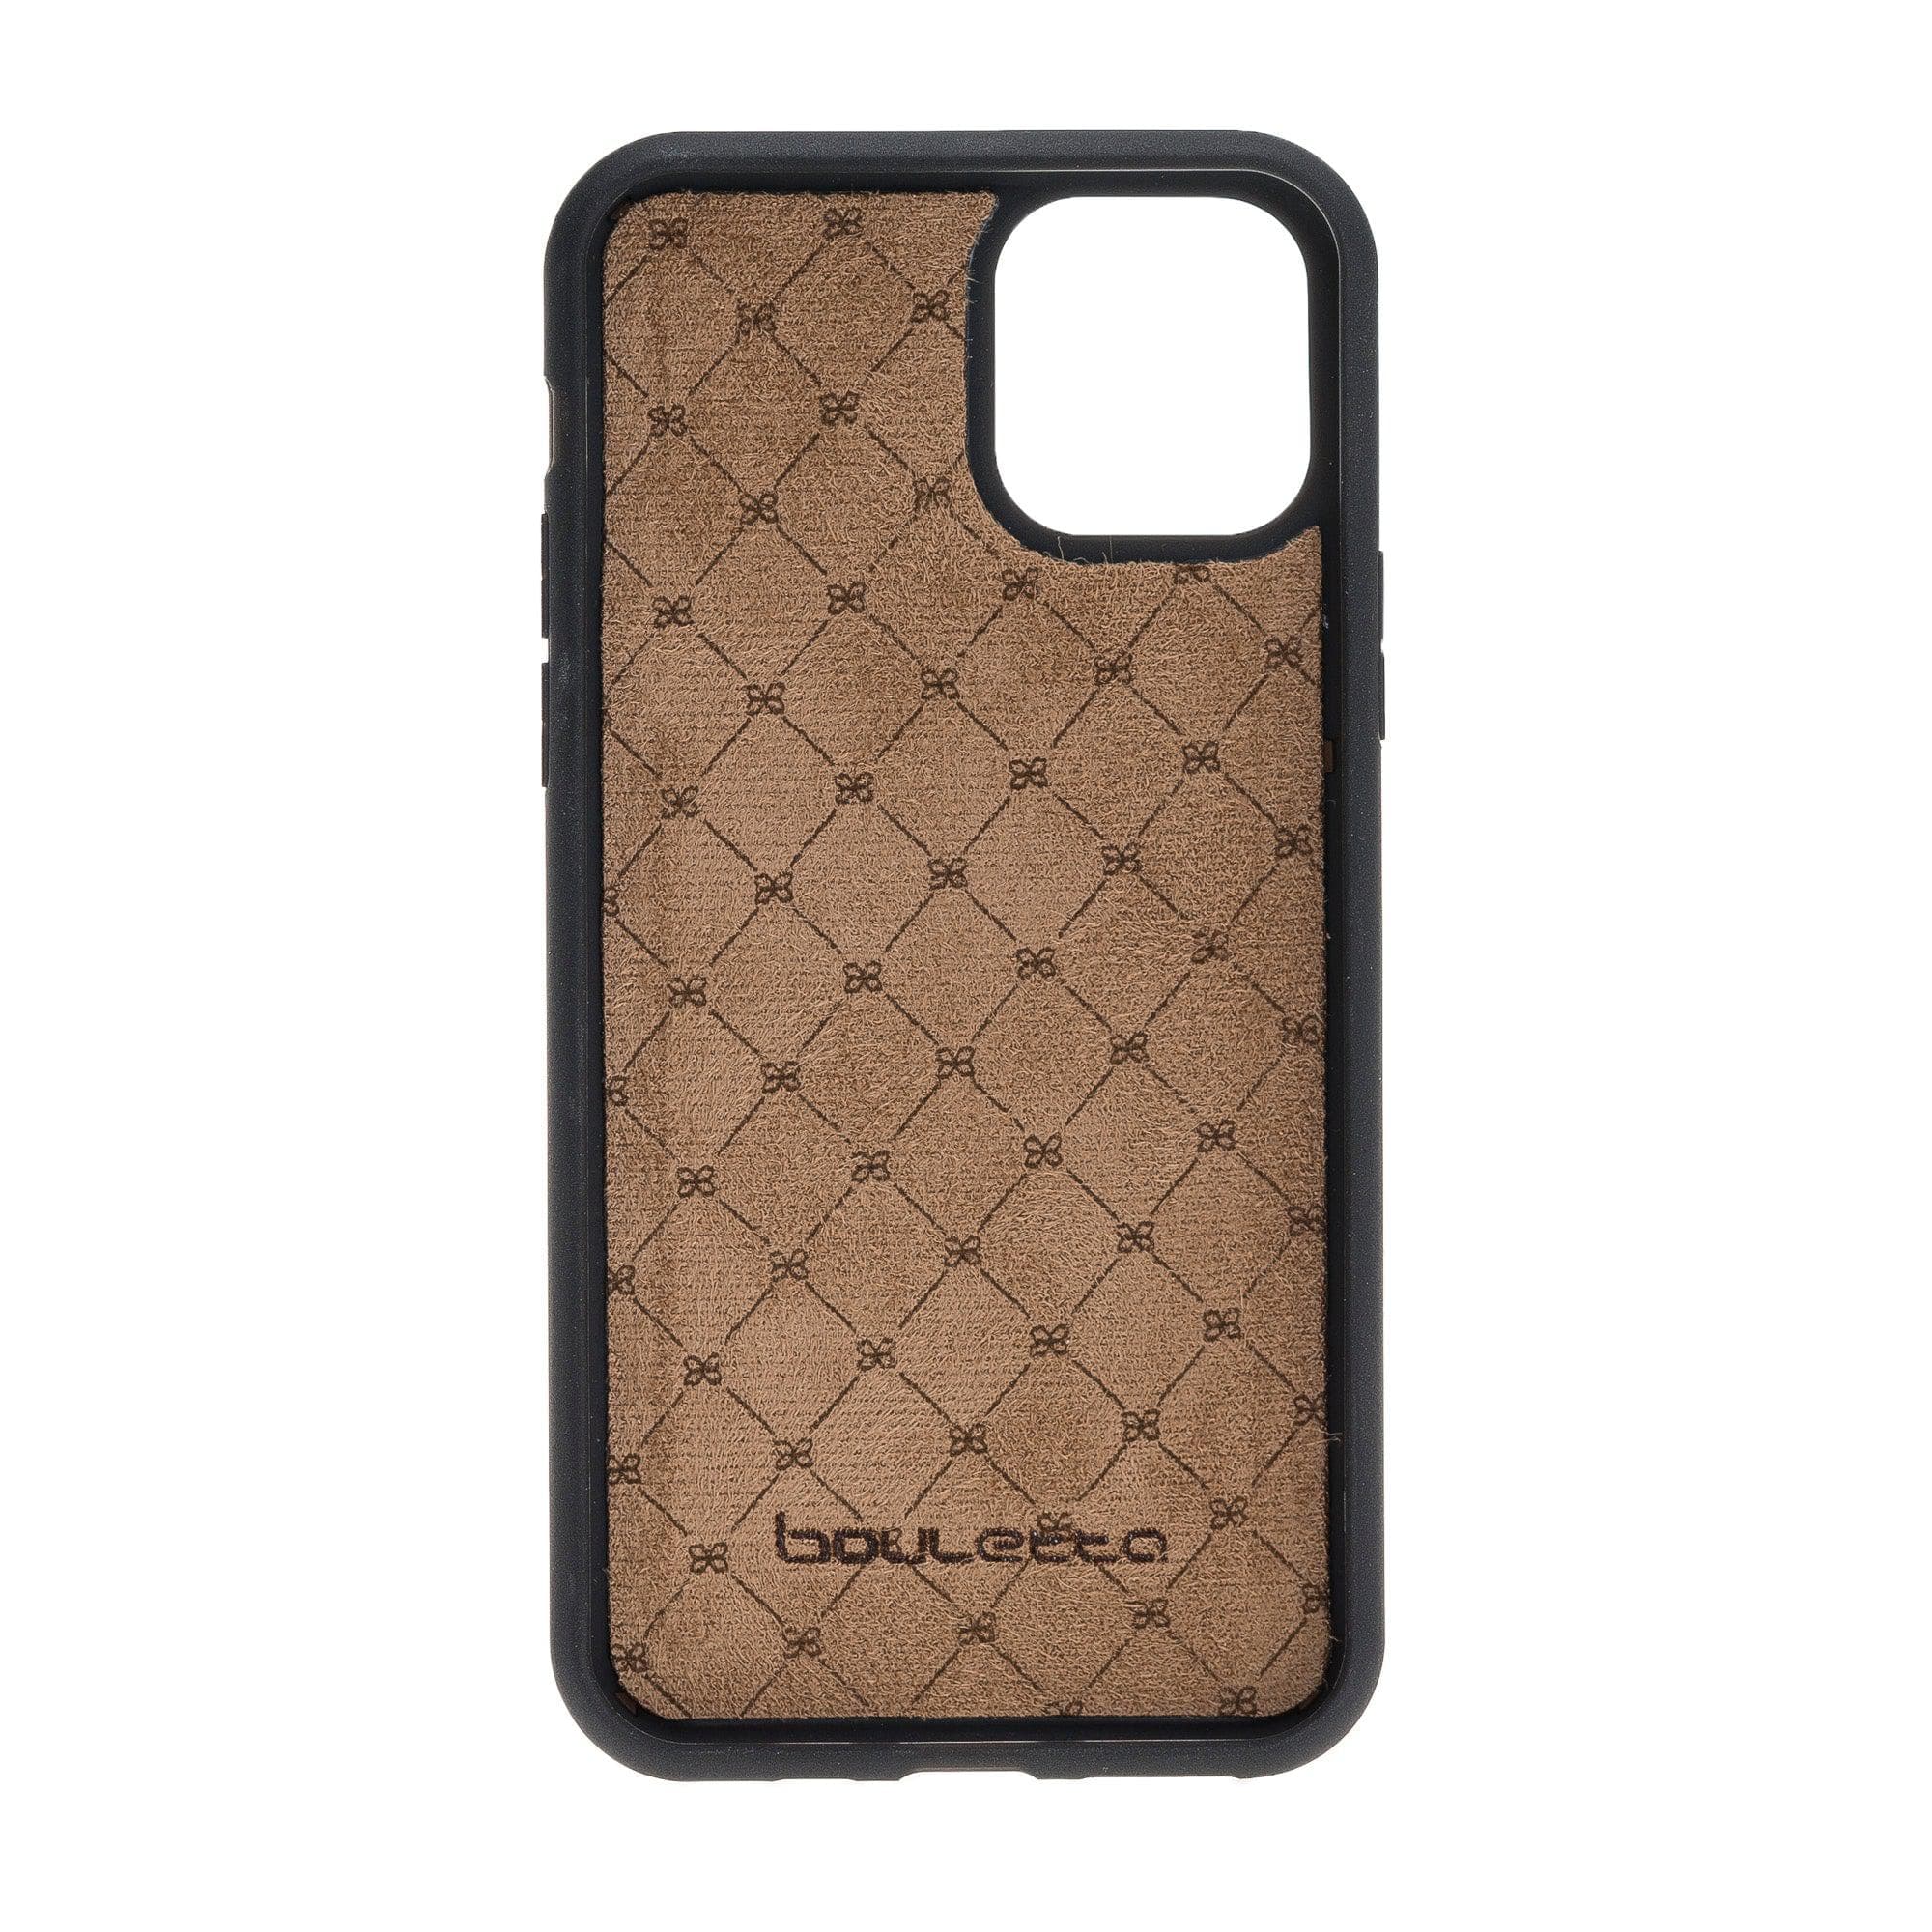 Leather Folio Louis Vuitton And Gucci iPhone Case + FREE AIRPODS